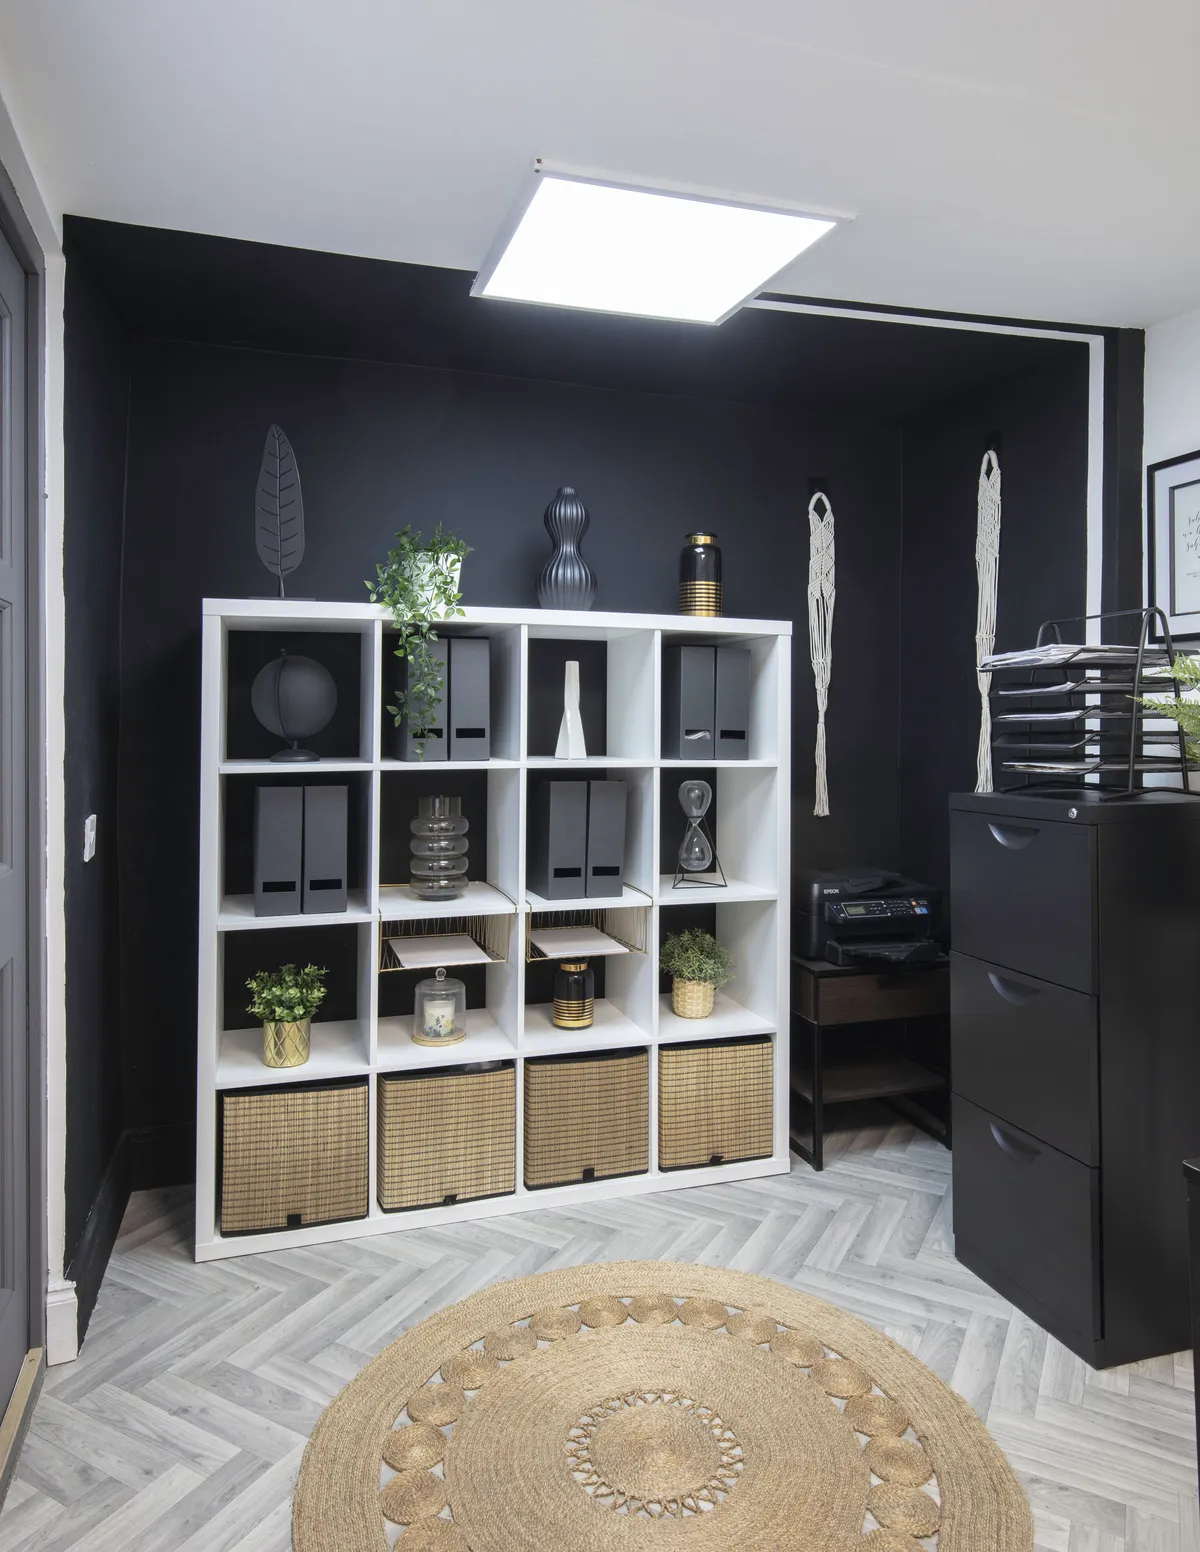 Alimah went bold with a black feature wall and sleek furniture in the garden office. ‘My husband briefed me on what he needed and left the design up to me,’ she says. ‘Black was perfect for disguising the imperfections of the walls, which are not 100 per cent straight’